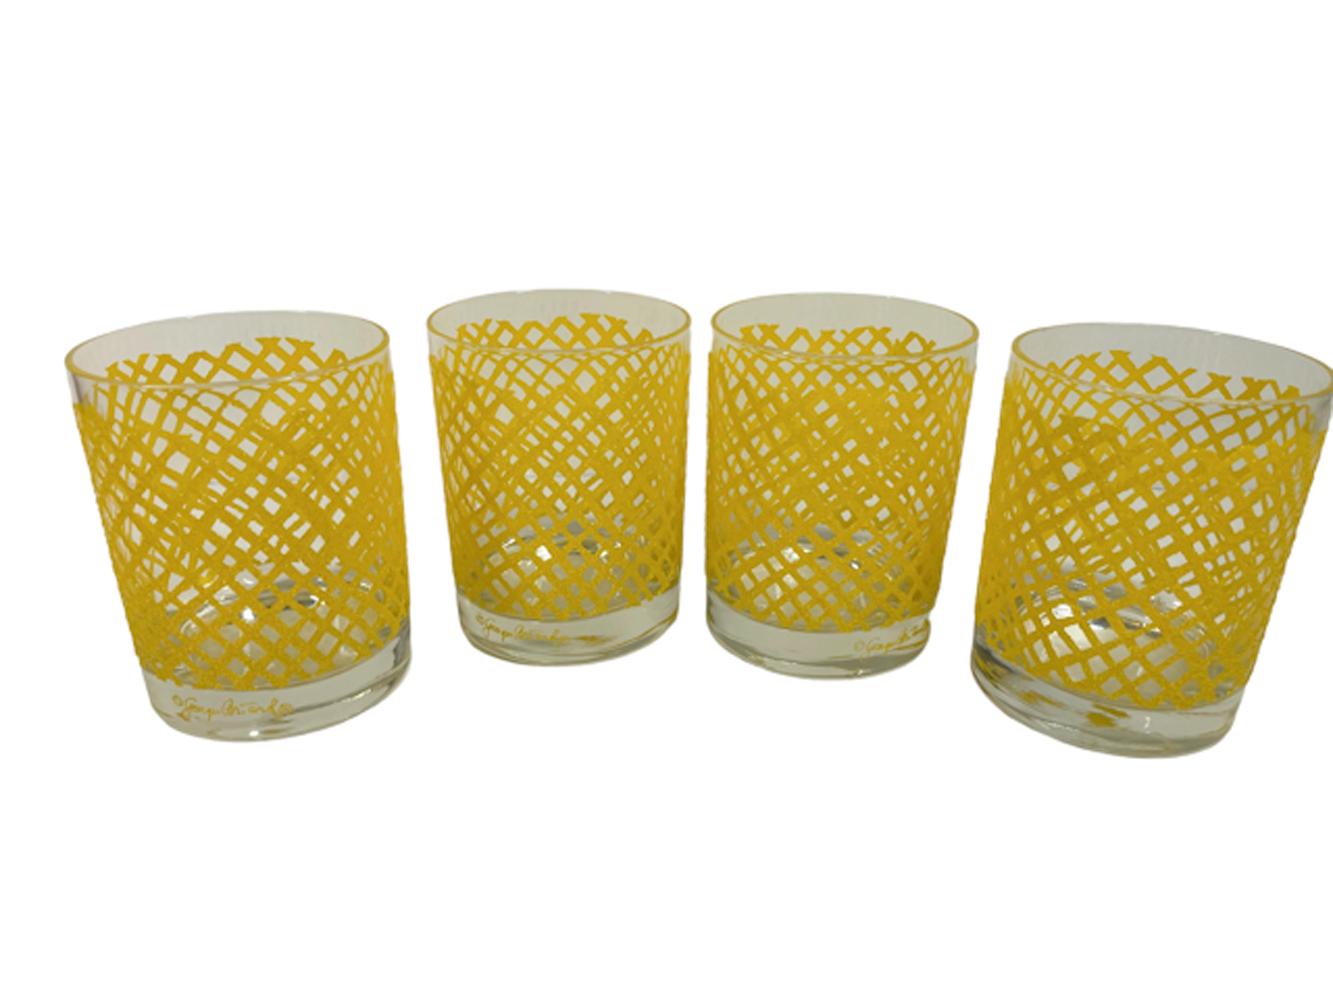 Vintage set of 4 rocks glasses designed by Georges Briard having an irregular pattern of netting in yellow with a raised and textured non-slip surface.